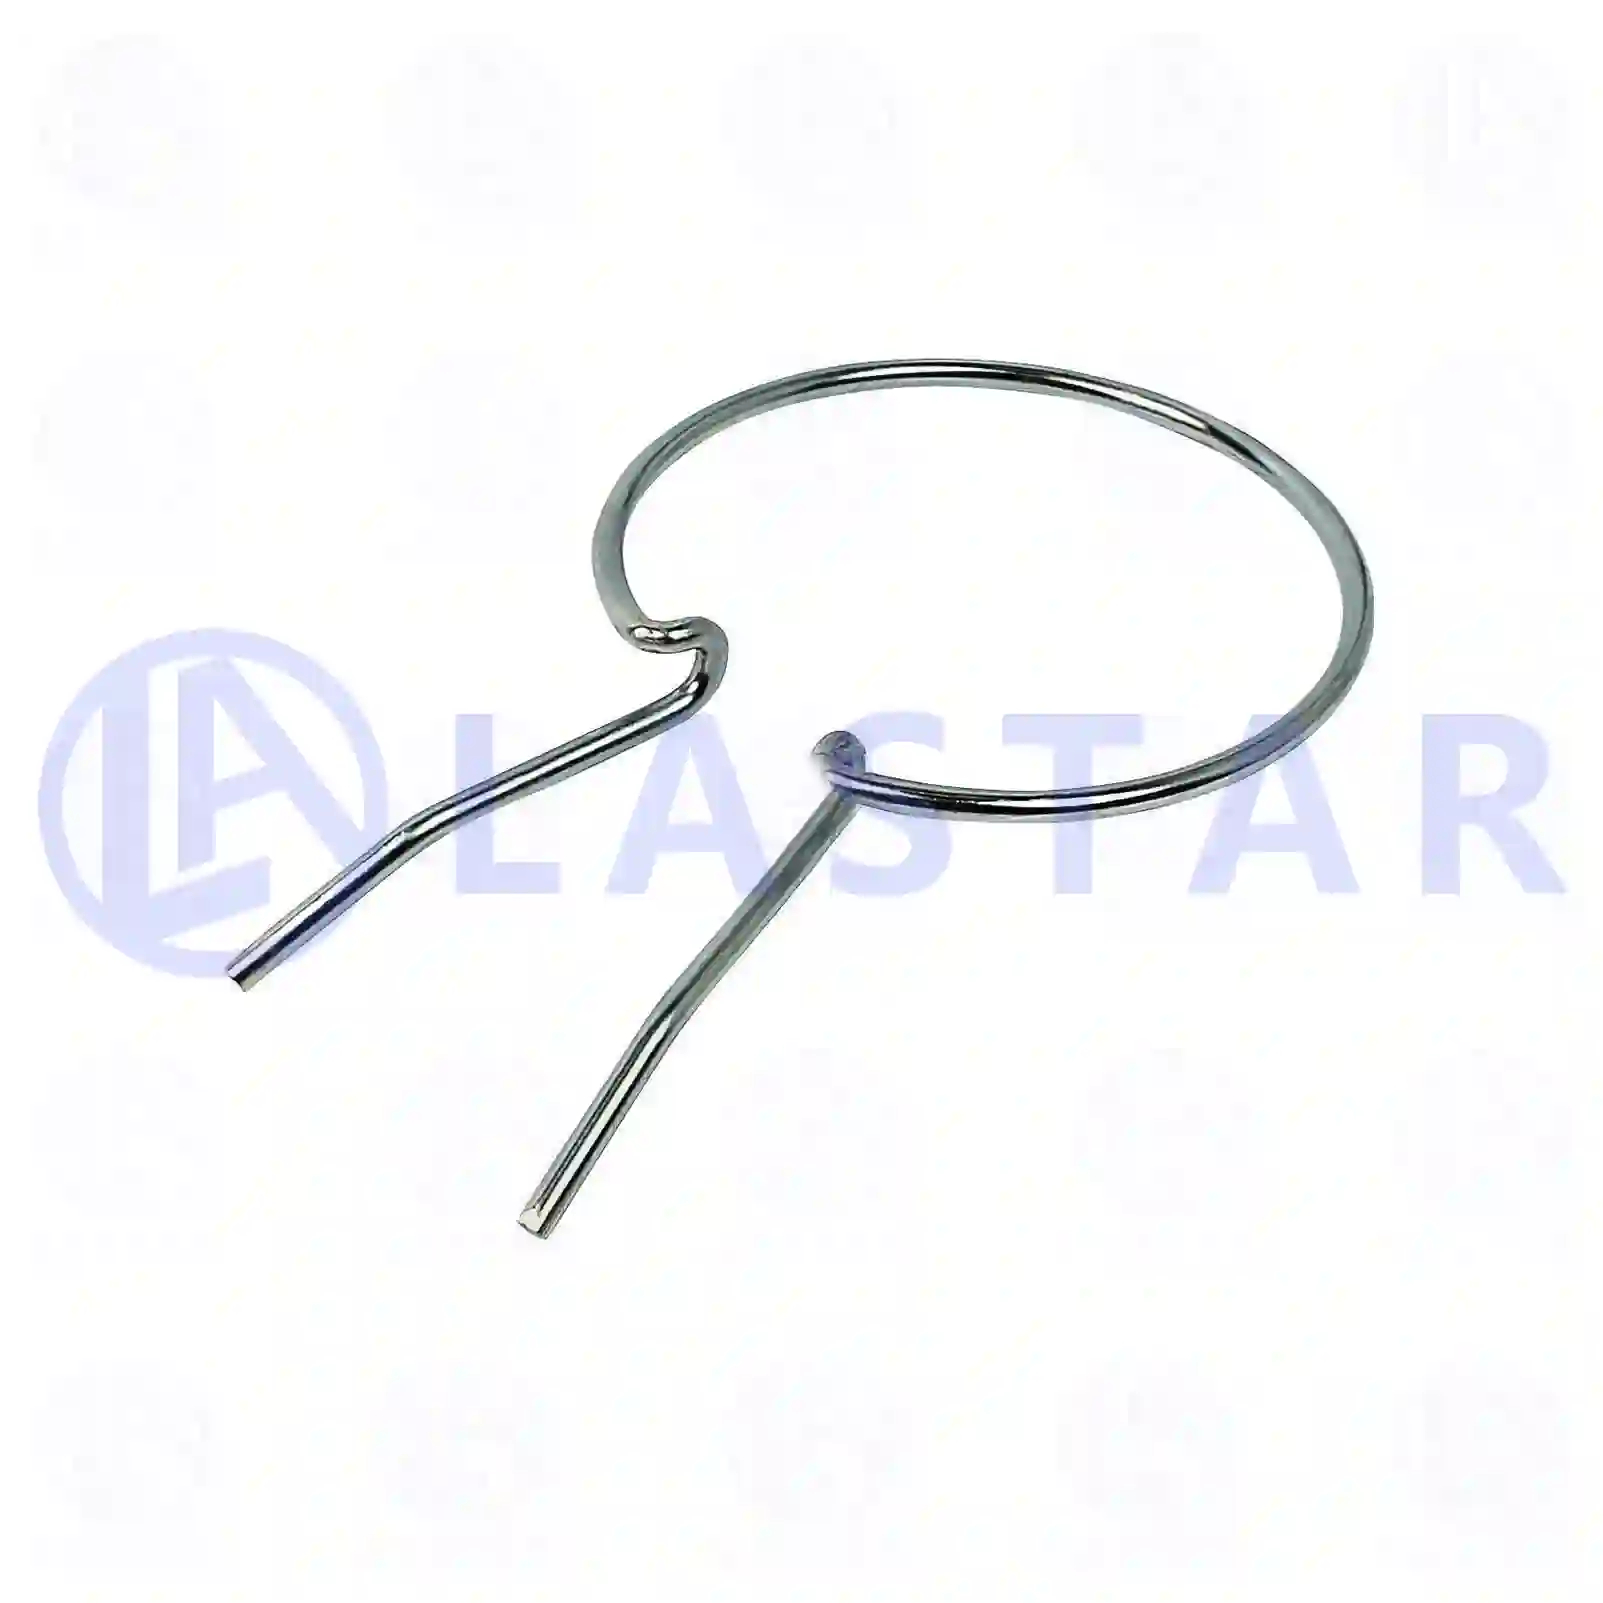  Clamping ring || Lastar Spare Part | Truck Spare Parts, Auotomotive Spare Parts